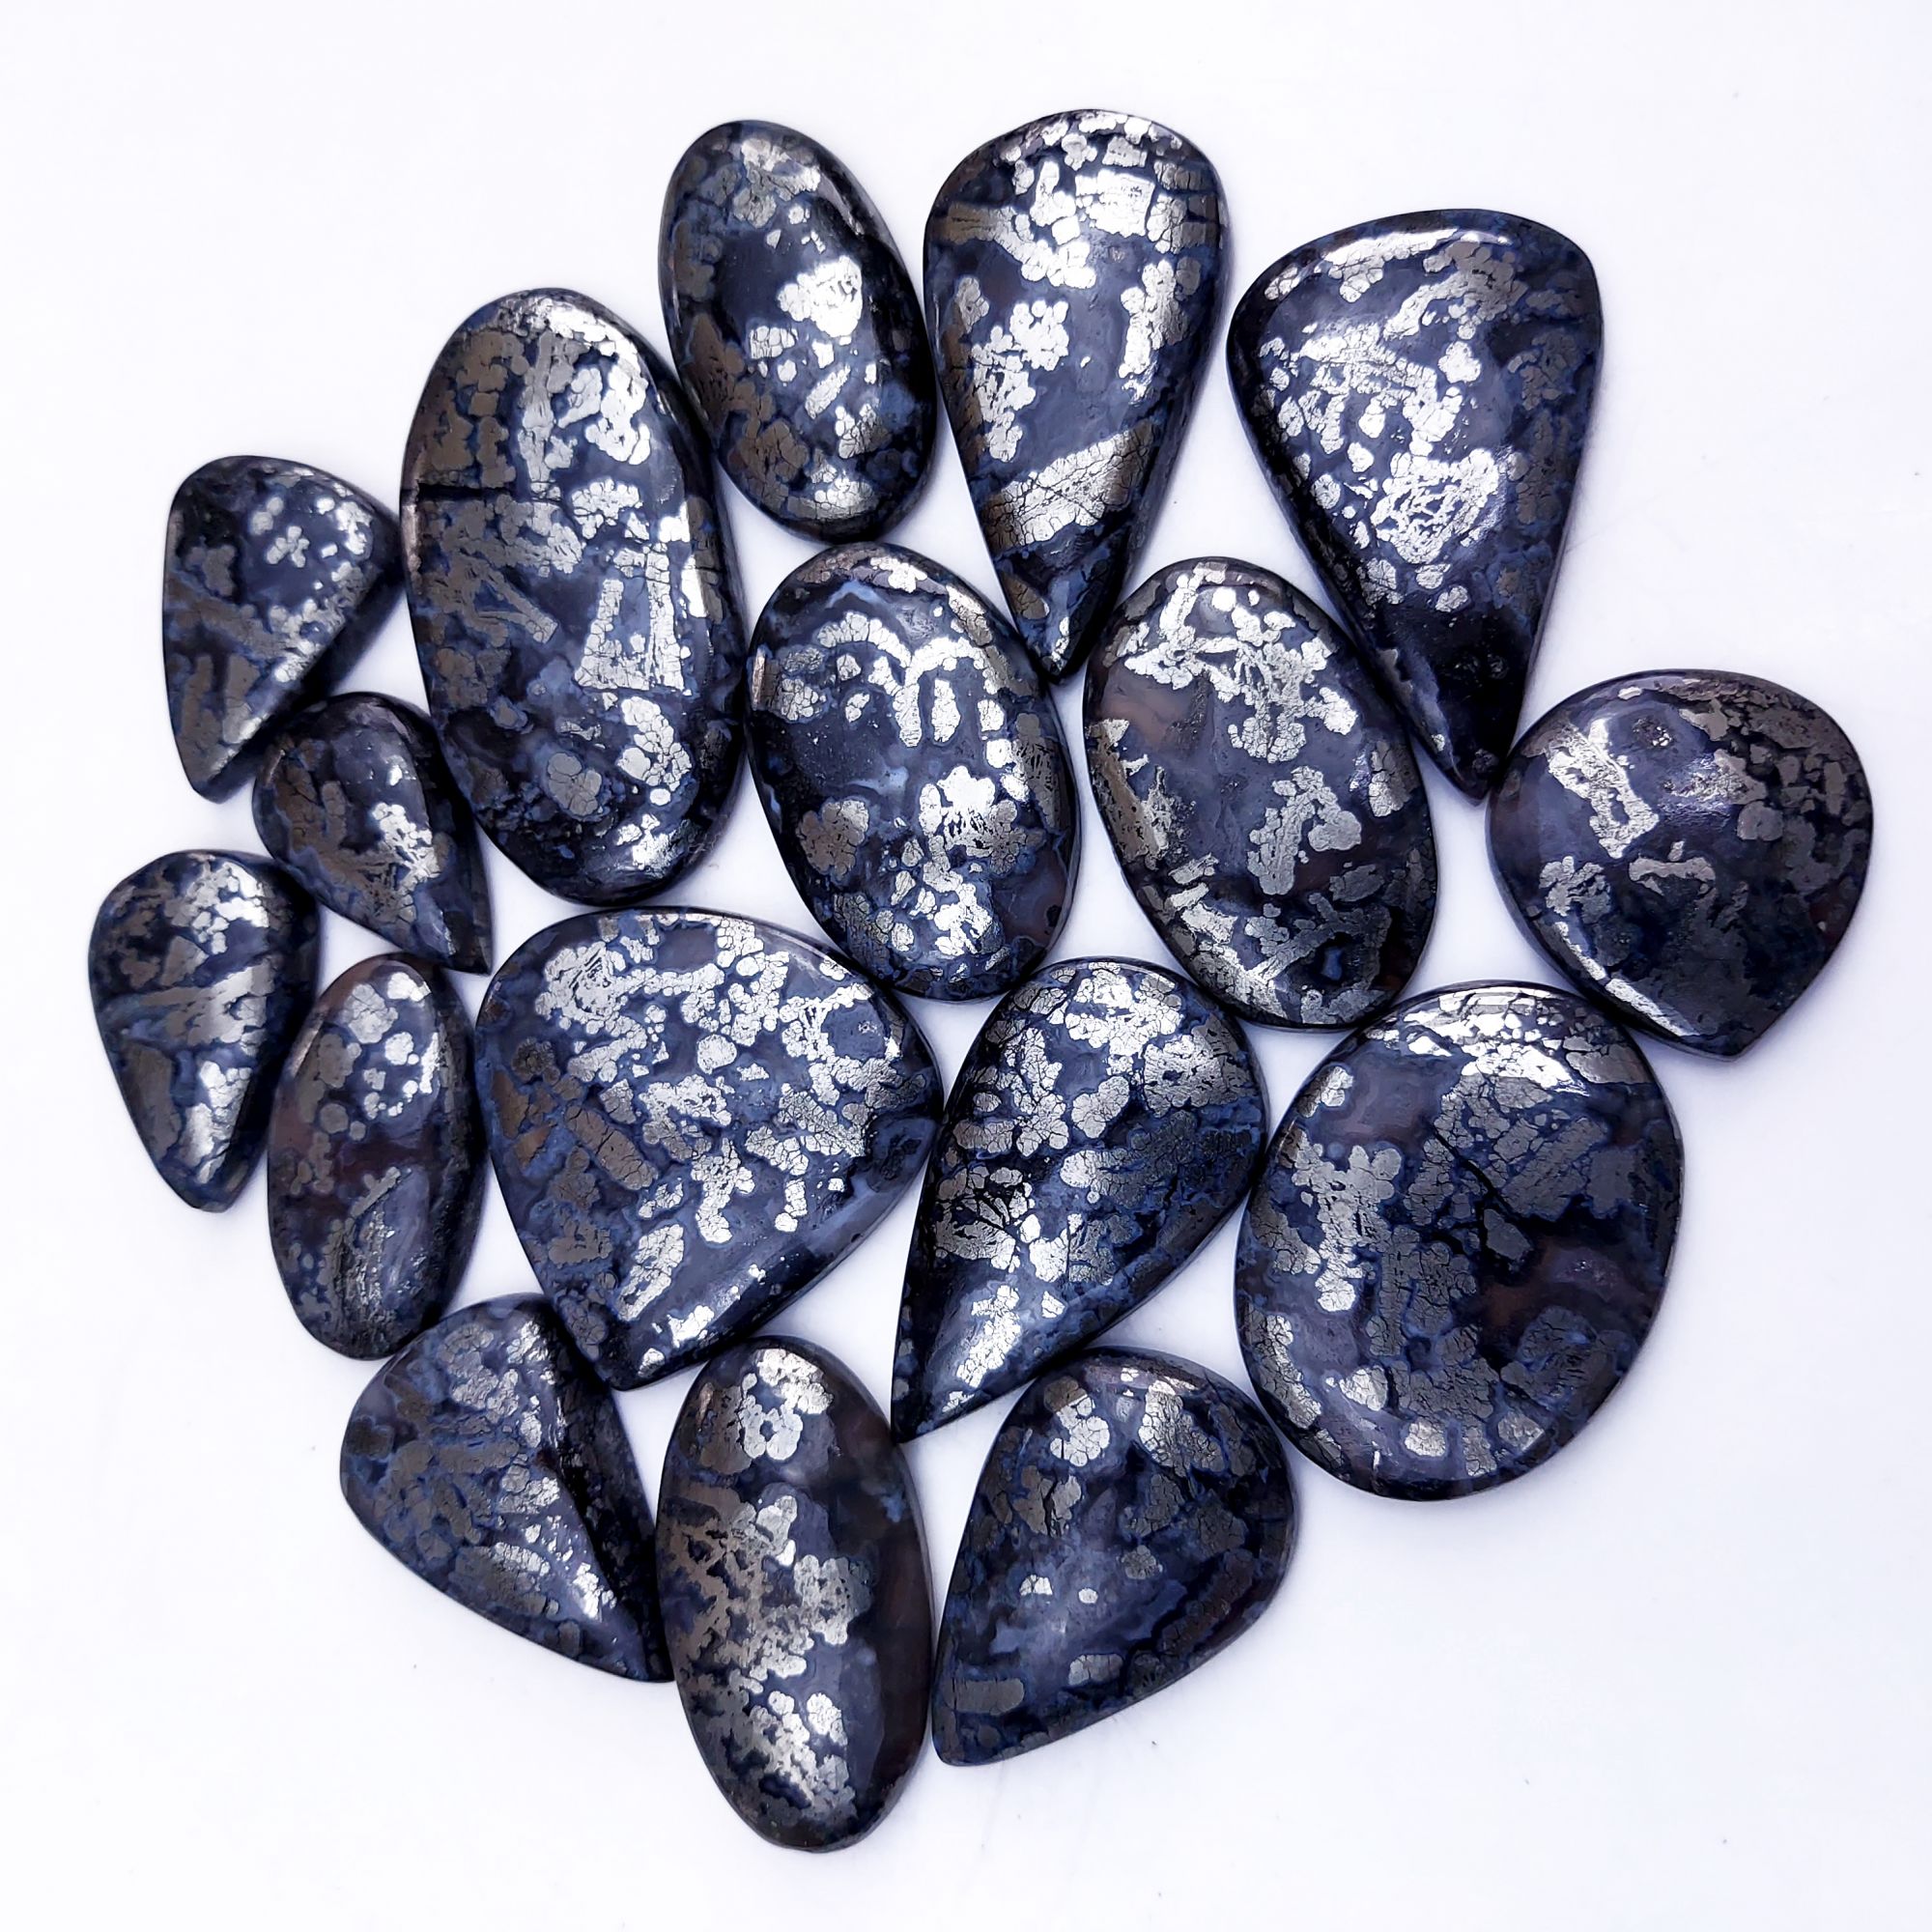 17Pcs 1030Cts Natural Marcasite Grey Cabochon Back Side Unpolished Gemstone Semi-Precious Gemstones For Jewelry Making 48x26 25x17mm #10032